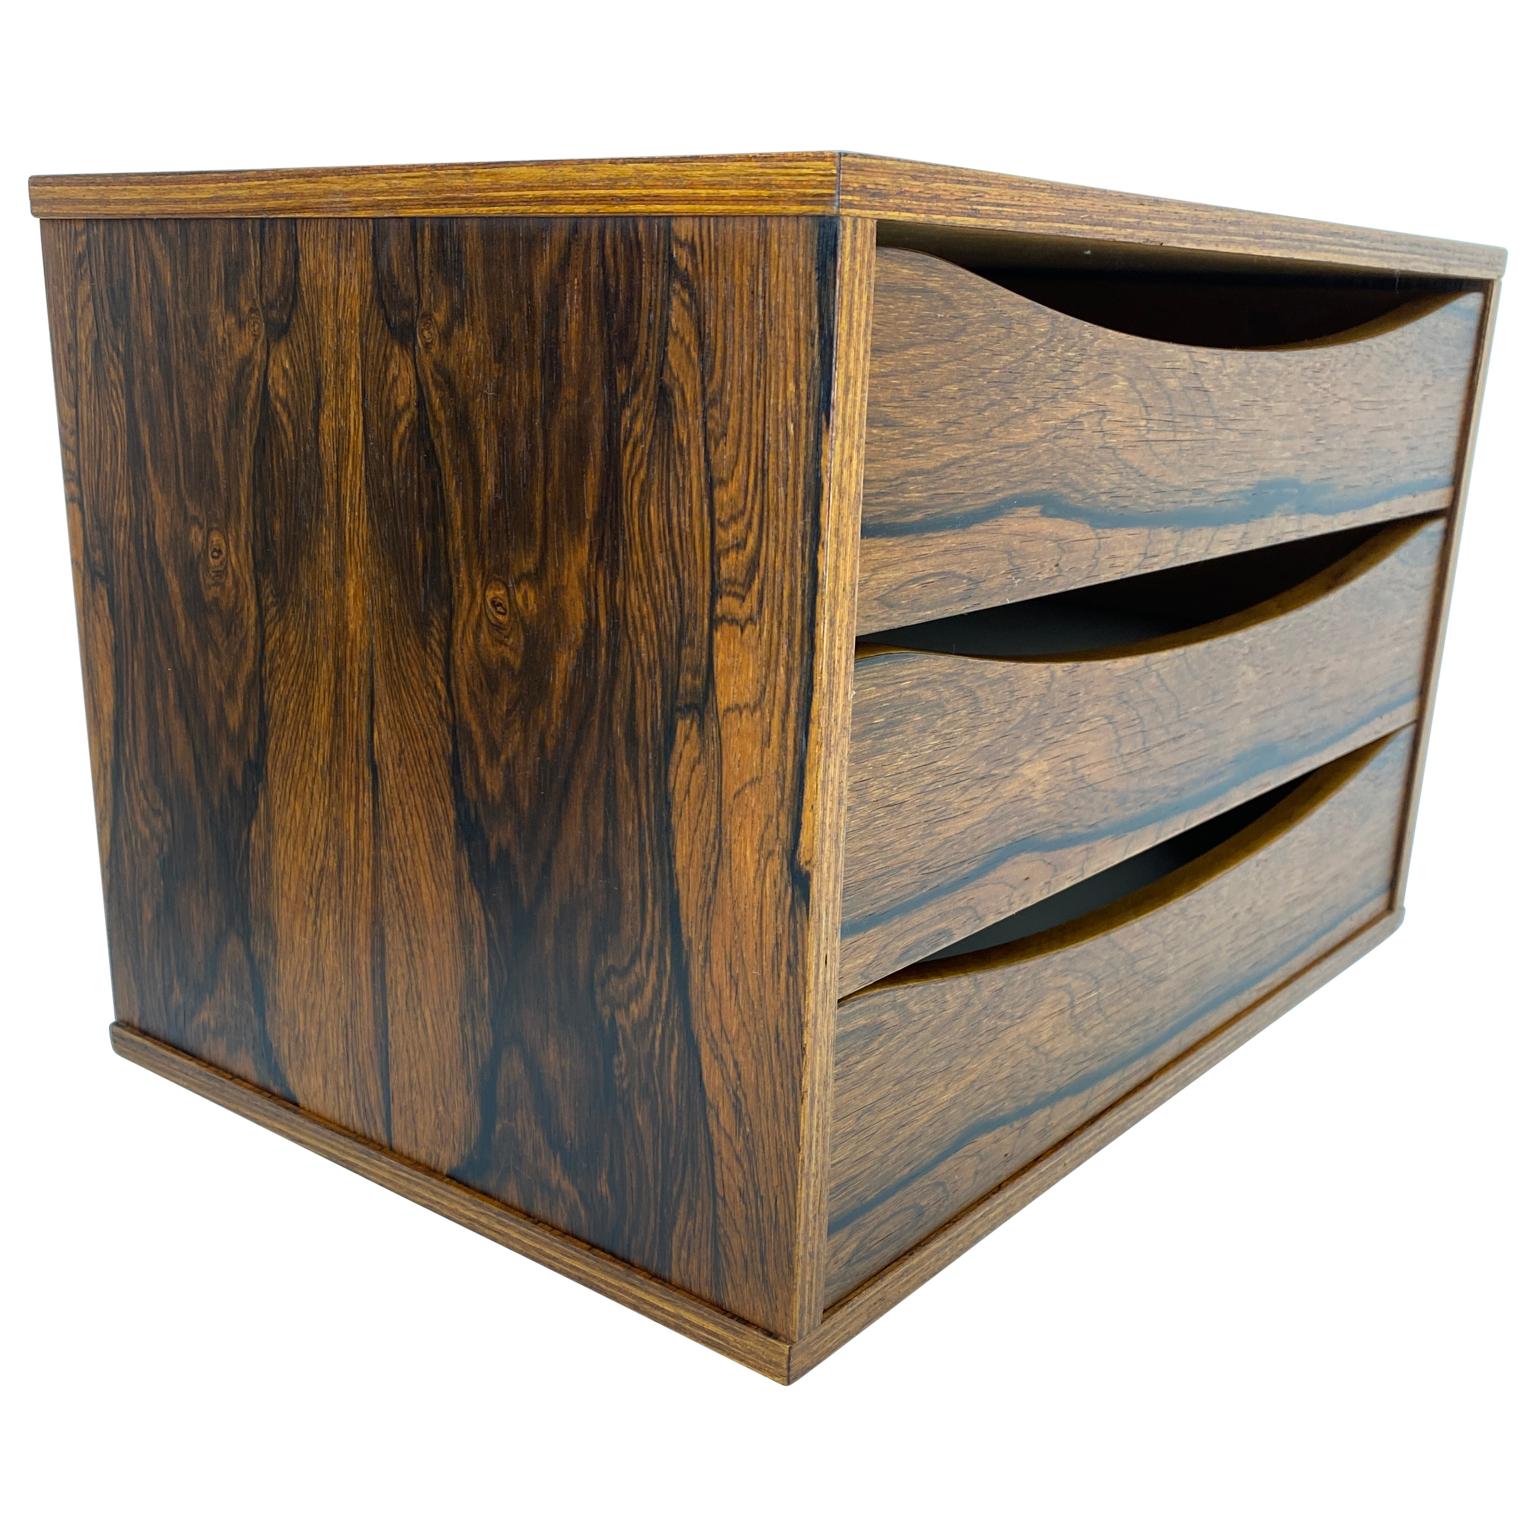 A Classic Scandinavian Modern refined and diminutive desk paper organizer in warm amazing rosewood, with three flush face drawers with arched cutout. The rack can certainly be used as a jewelry organizer as well.